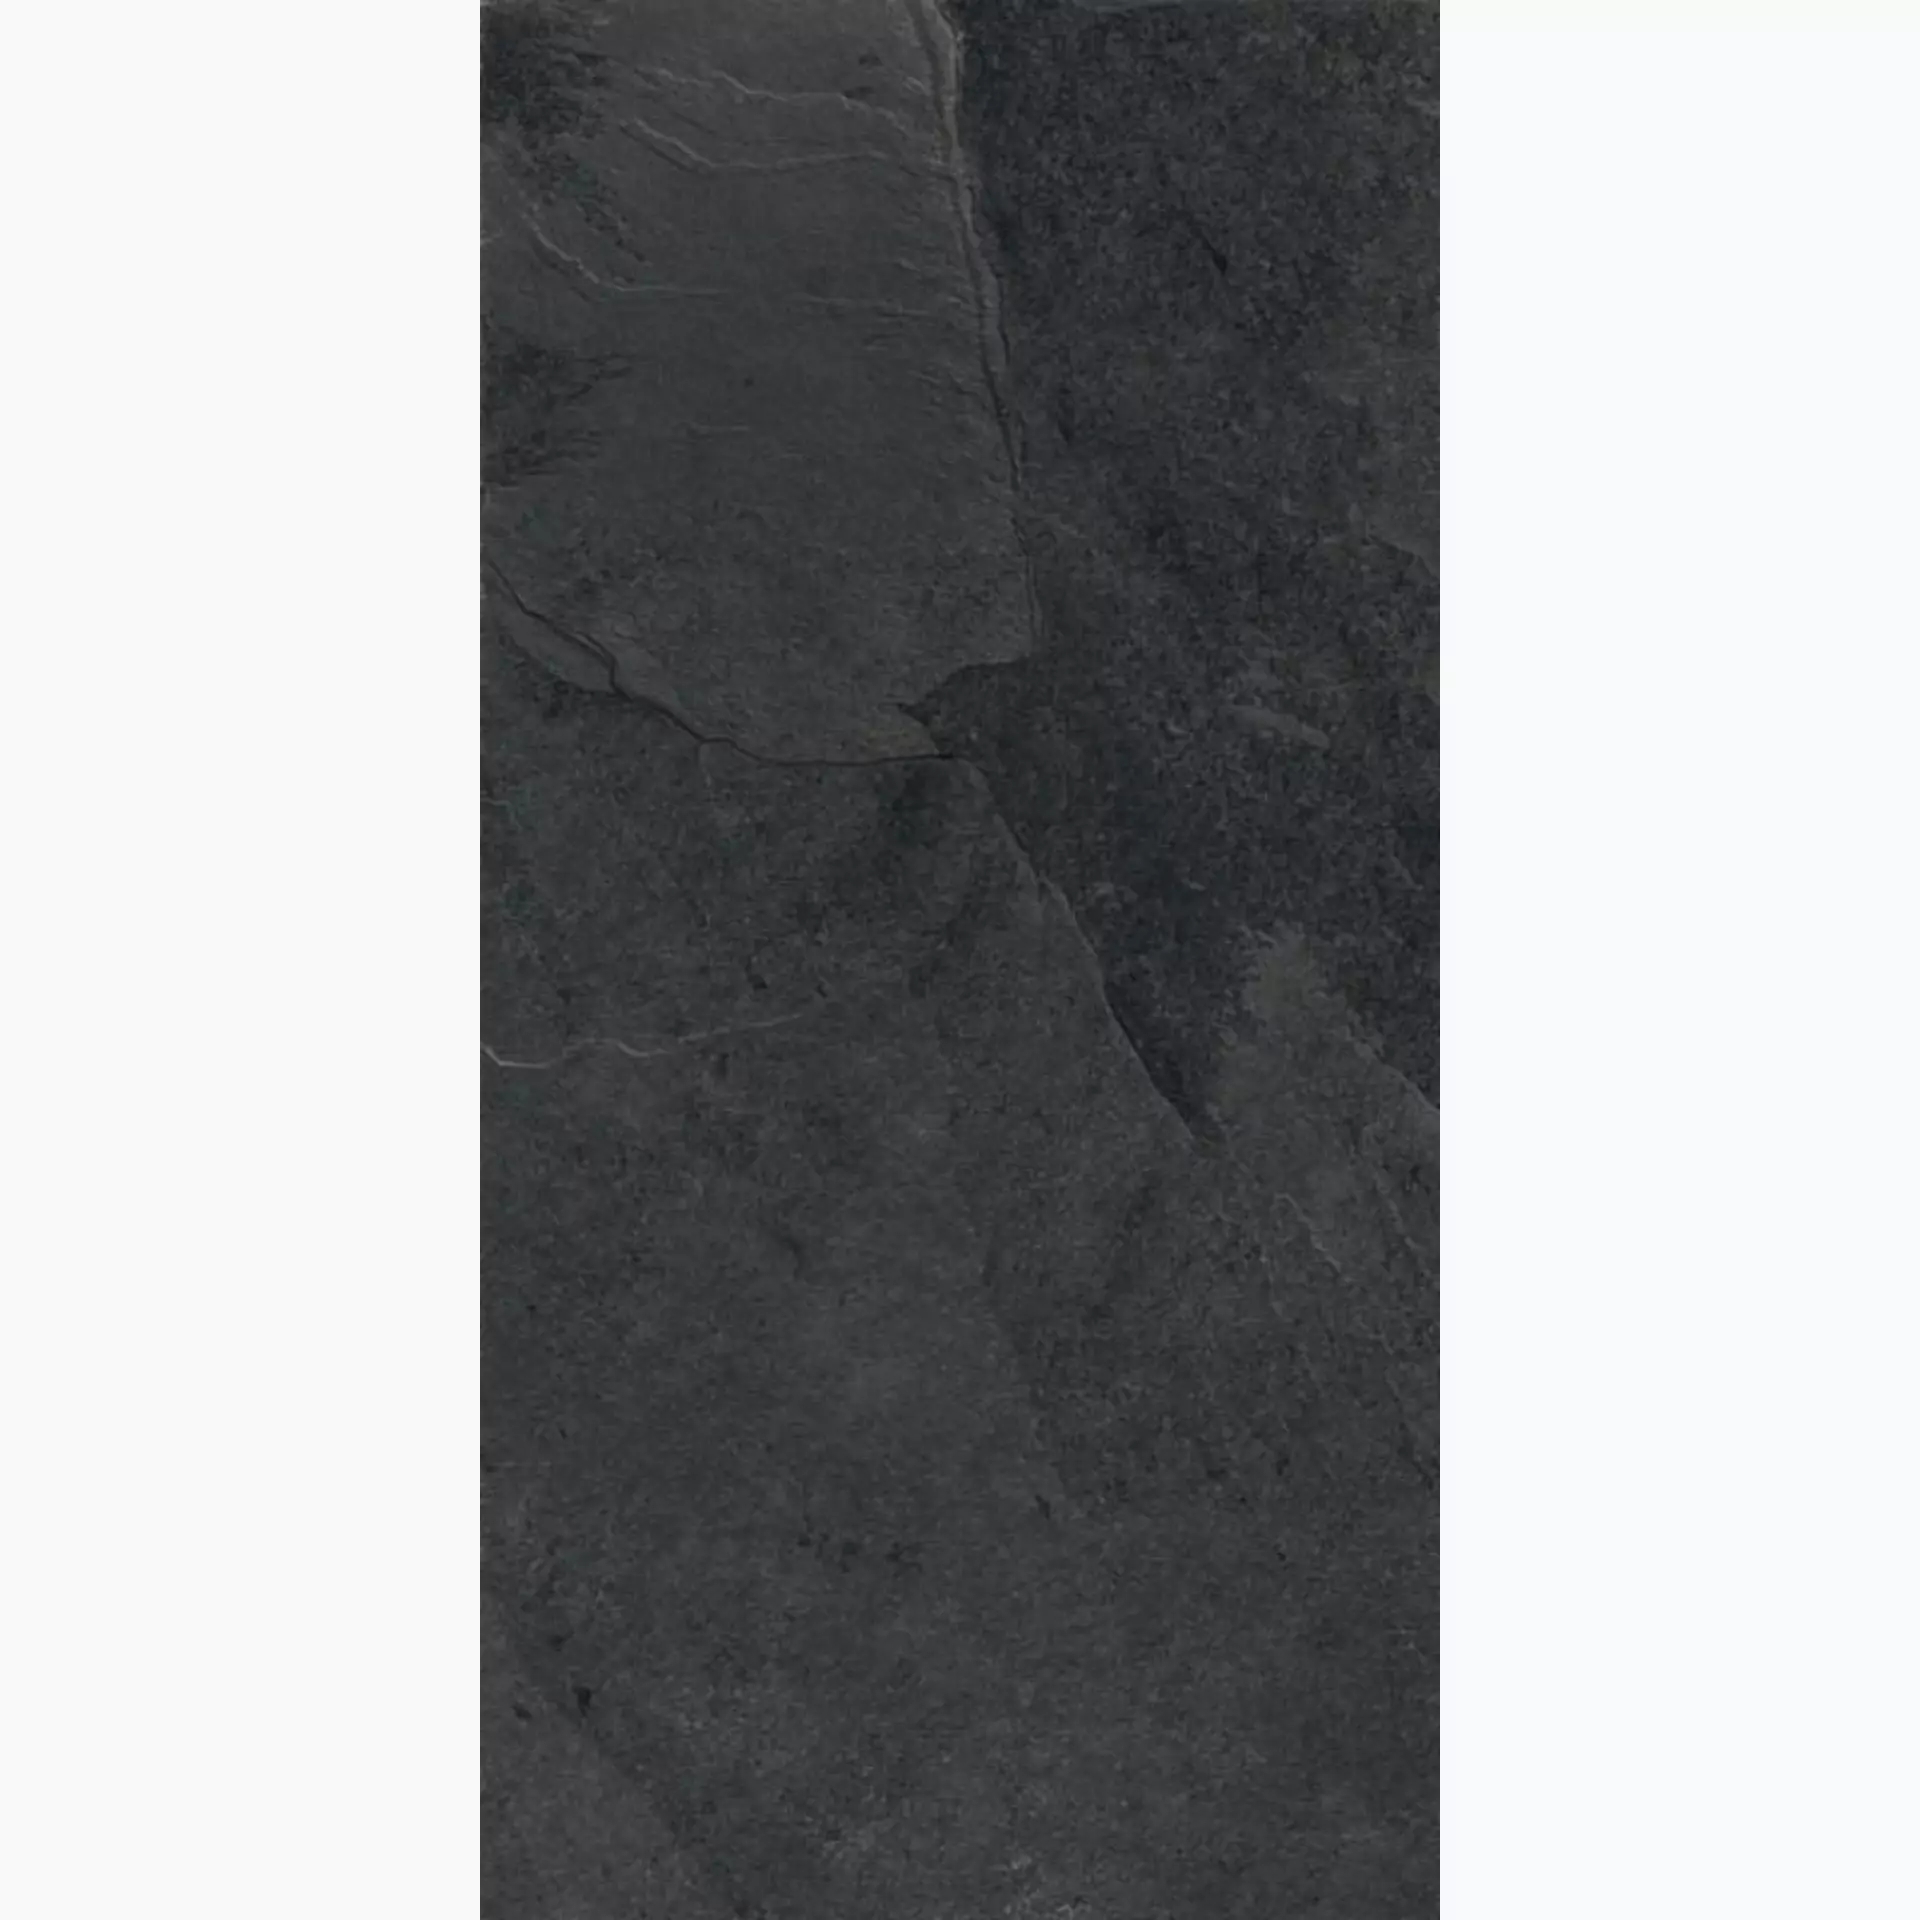 Sant Agostino Unionstone Mustang Natural CSAMSTNG30 30x60cm rectified 10mm